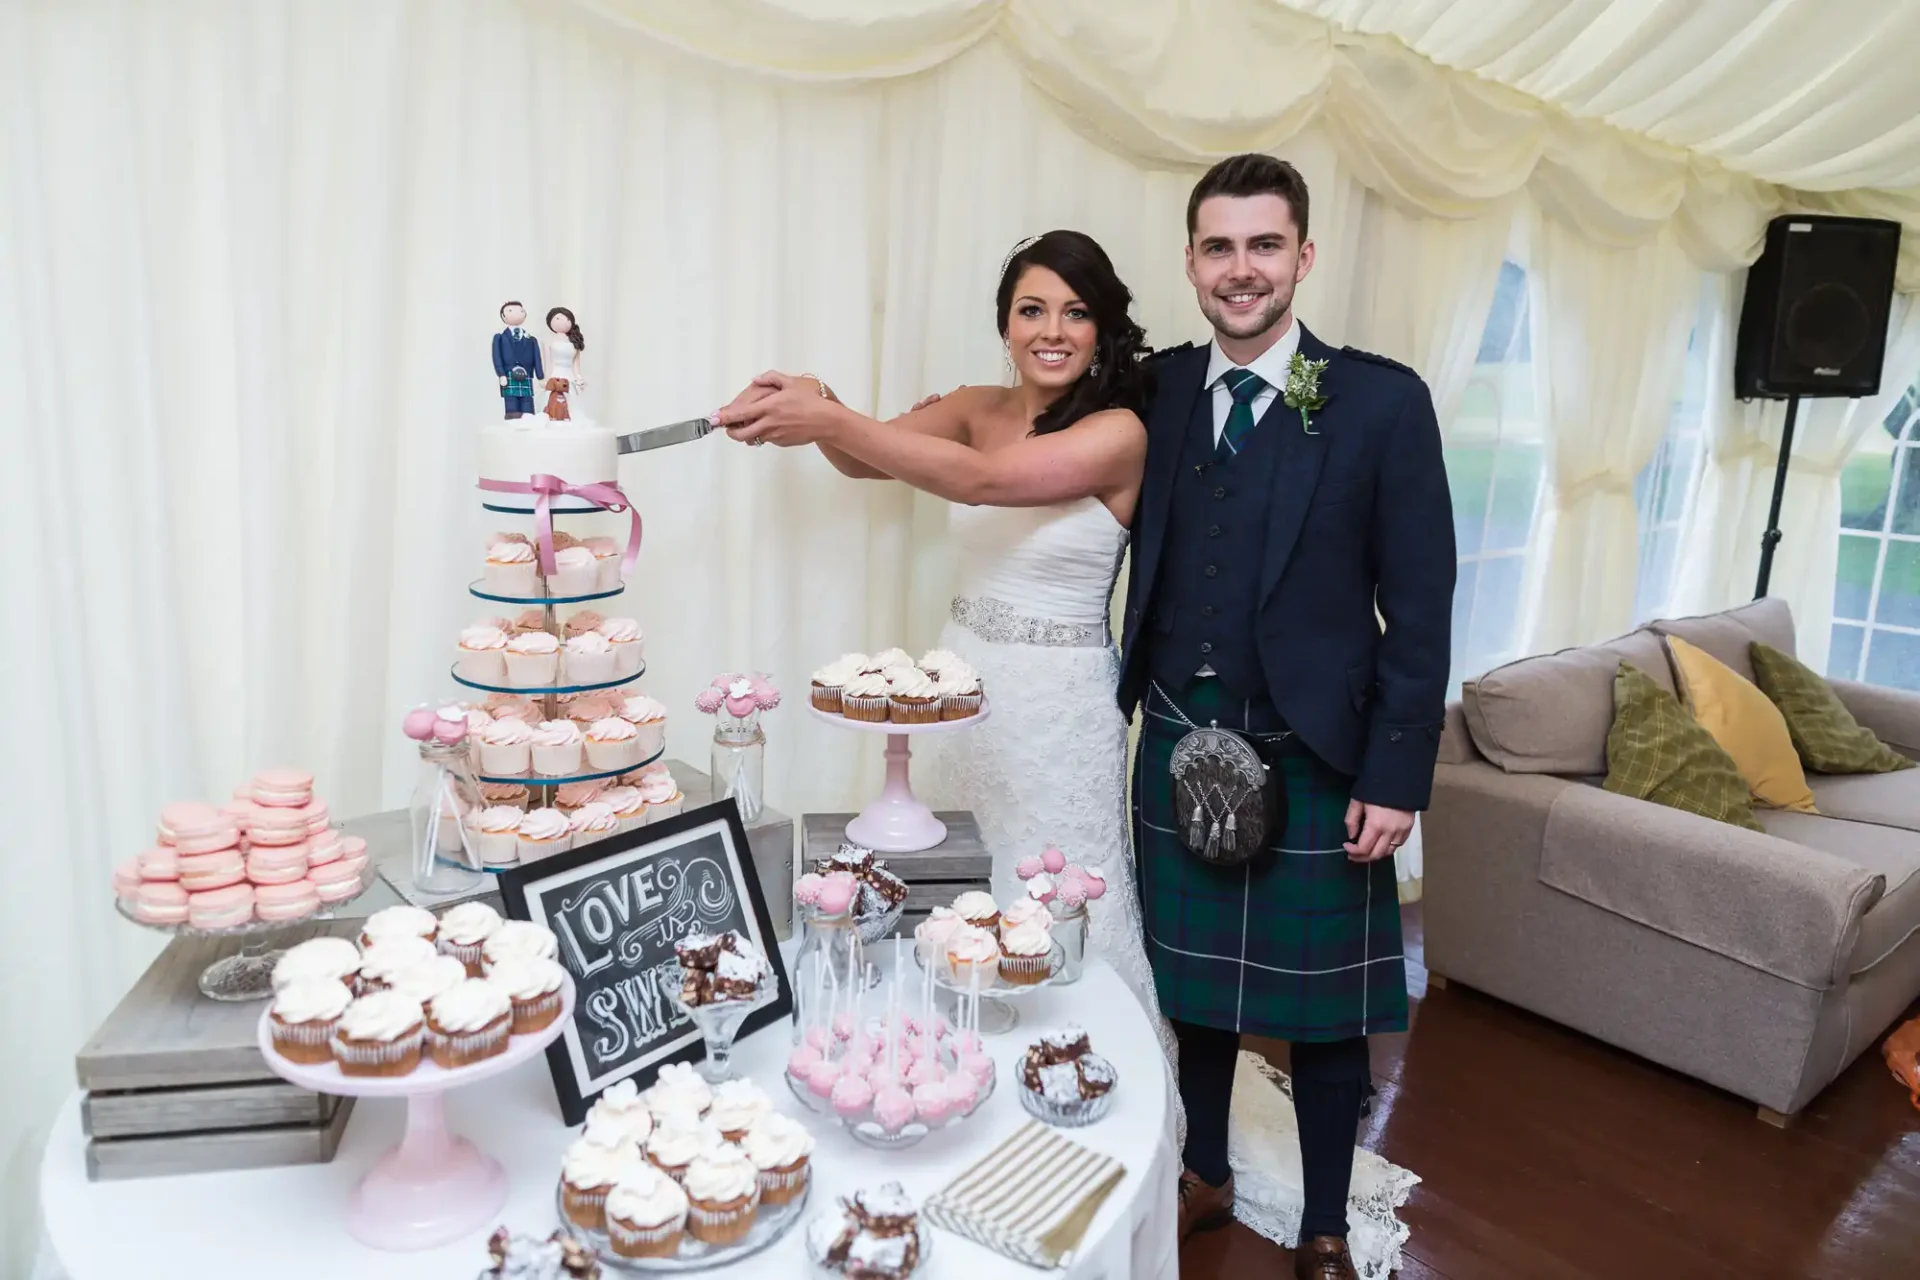 A bride in a white dress and a groom in a kilt cutting a wedding cake, surrounded by cupcakes and desserts in a decorated tent.